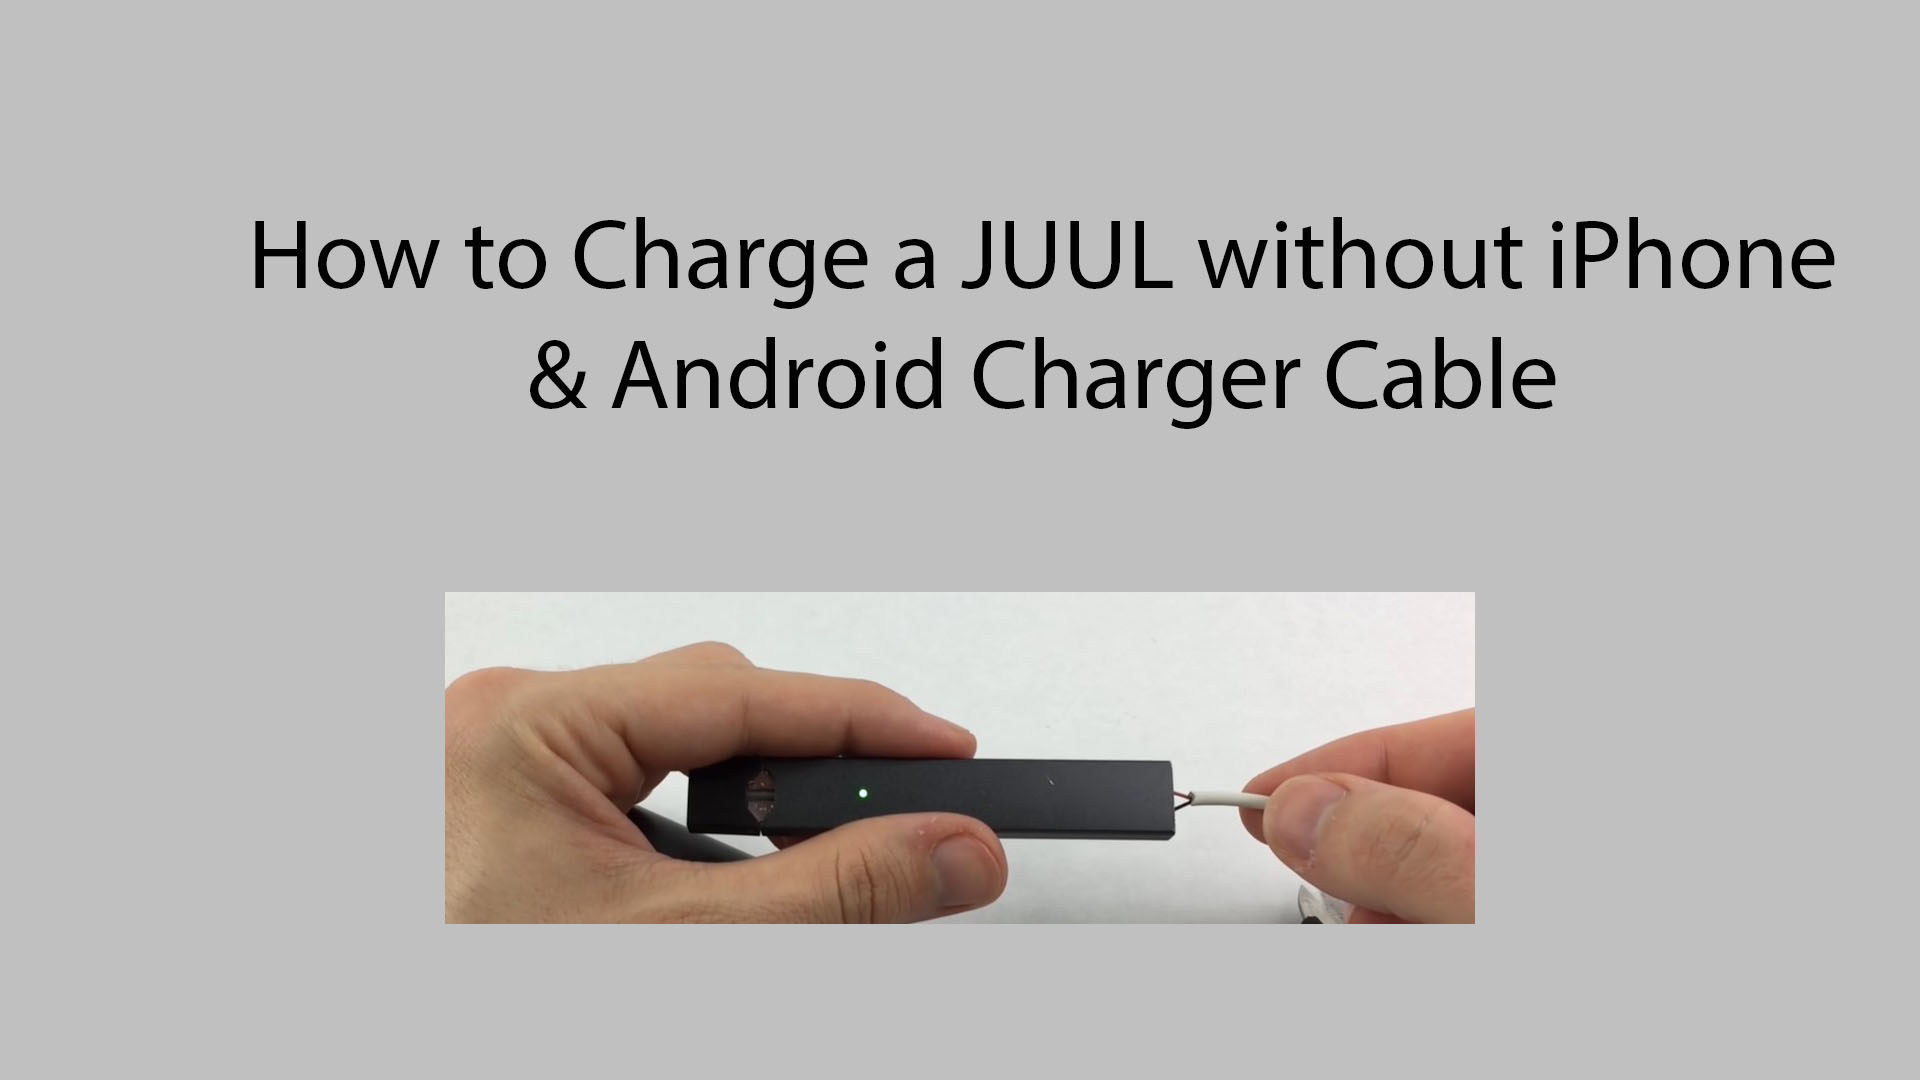 How to Charge a JUUL with iPhone Charger or other devices